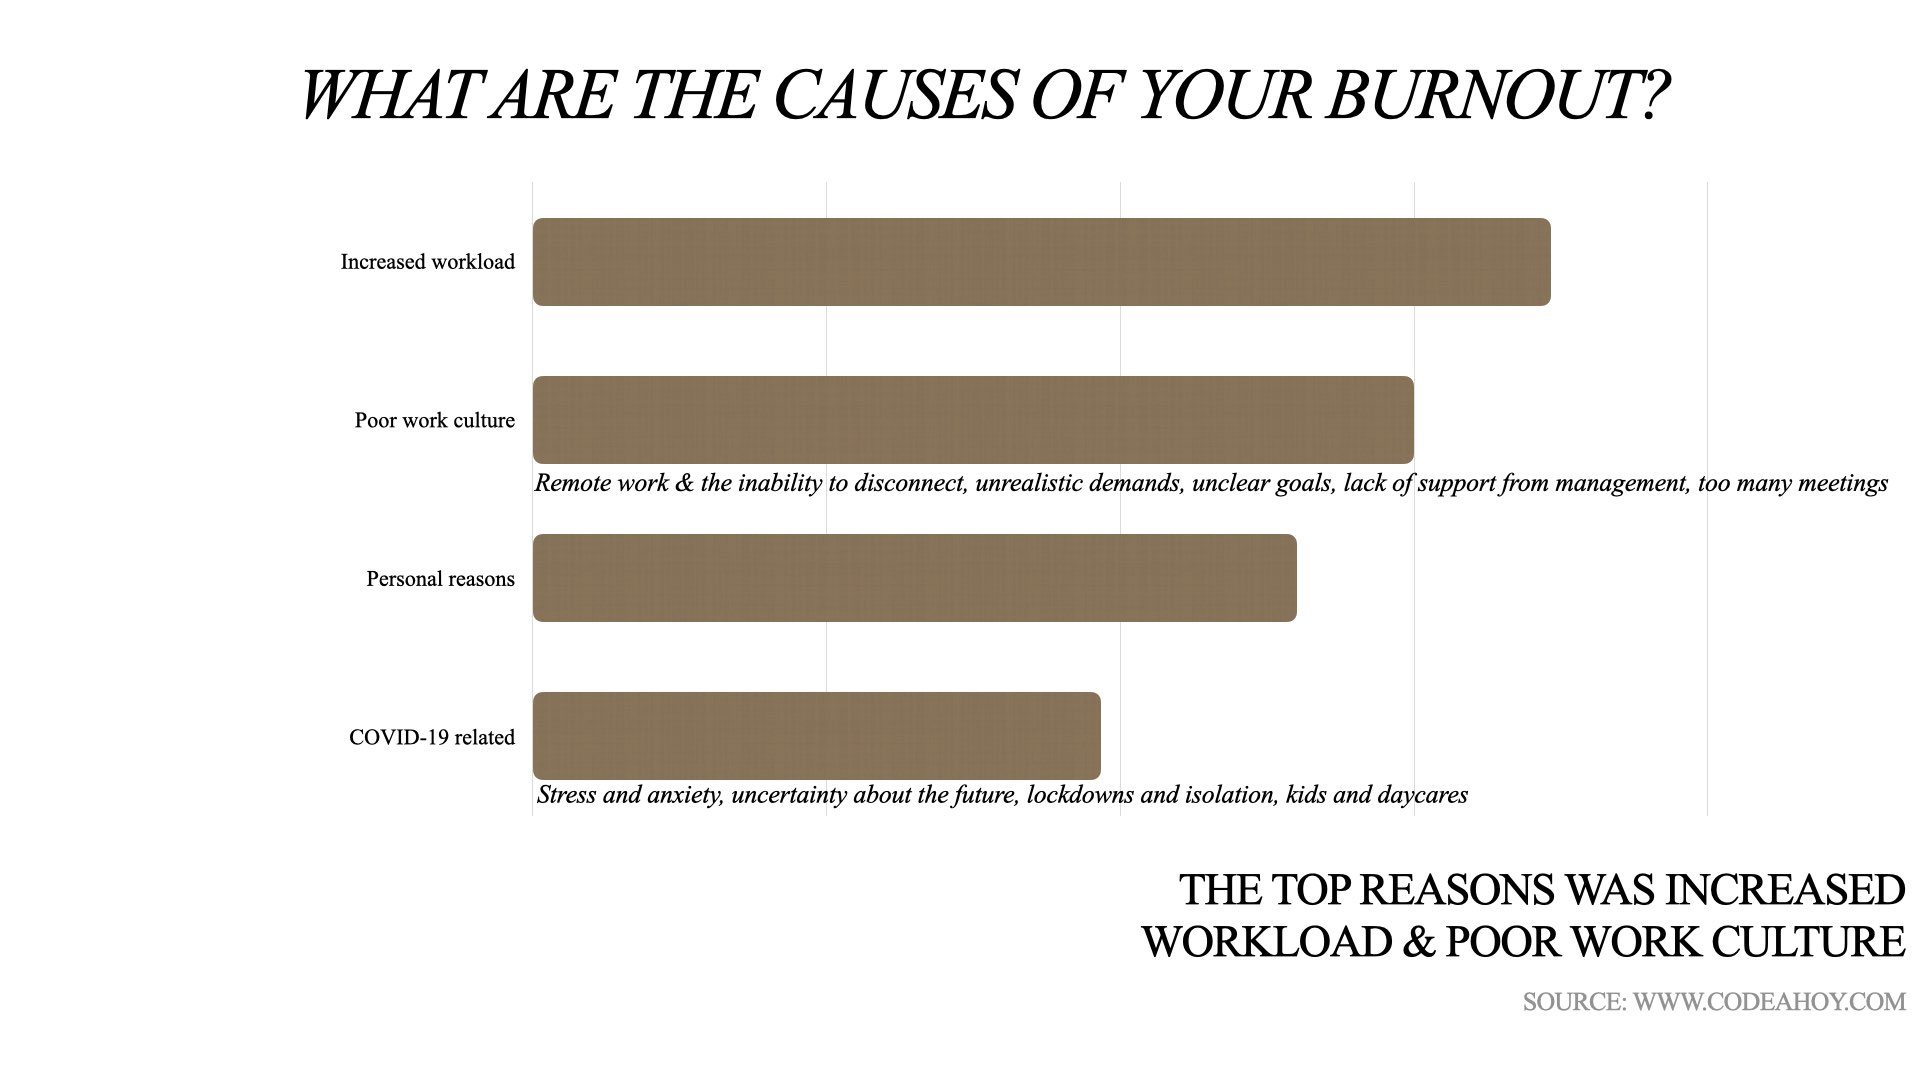 Software developers burnout survey chart and stats - 3